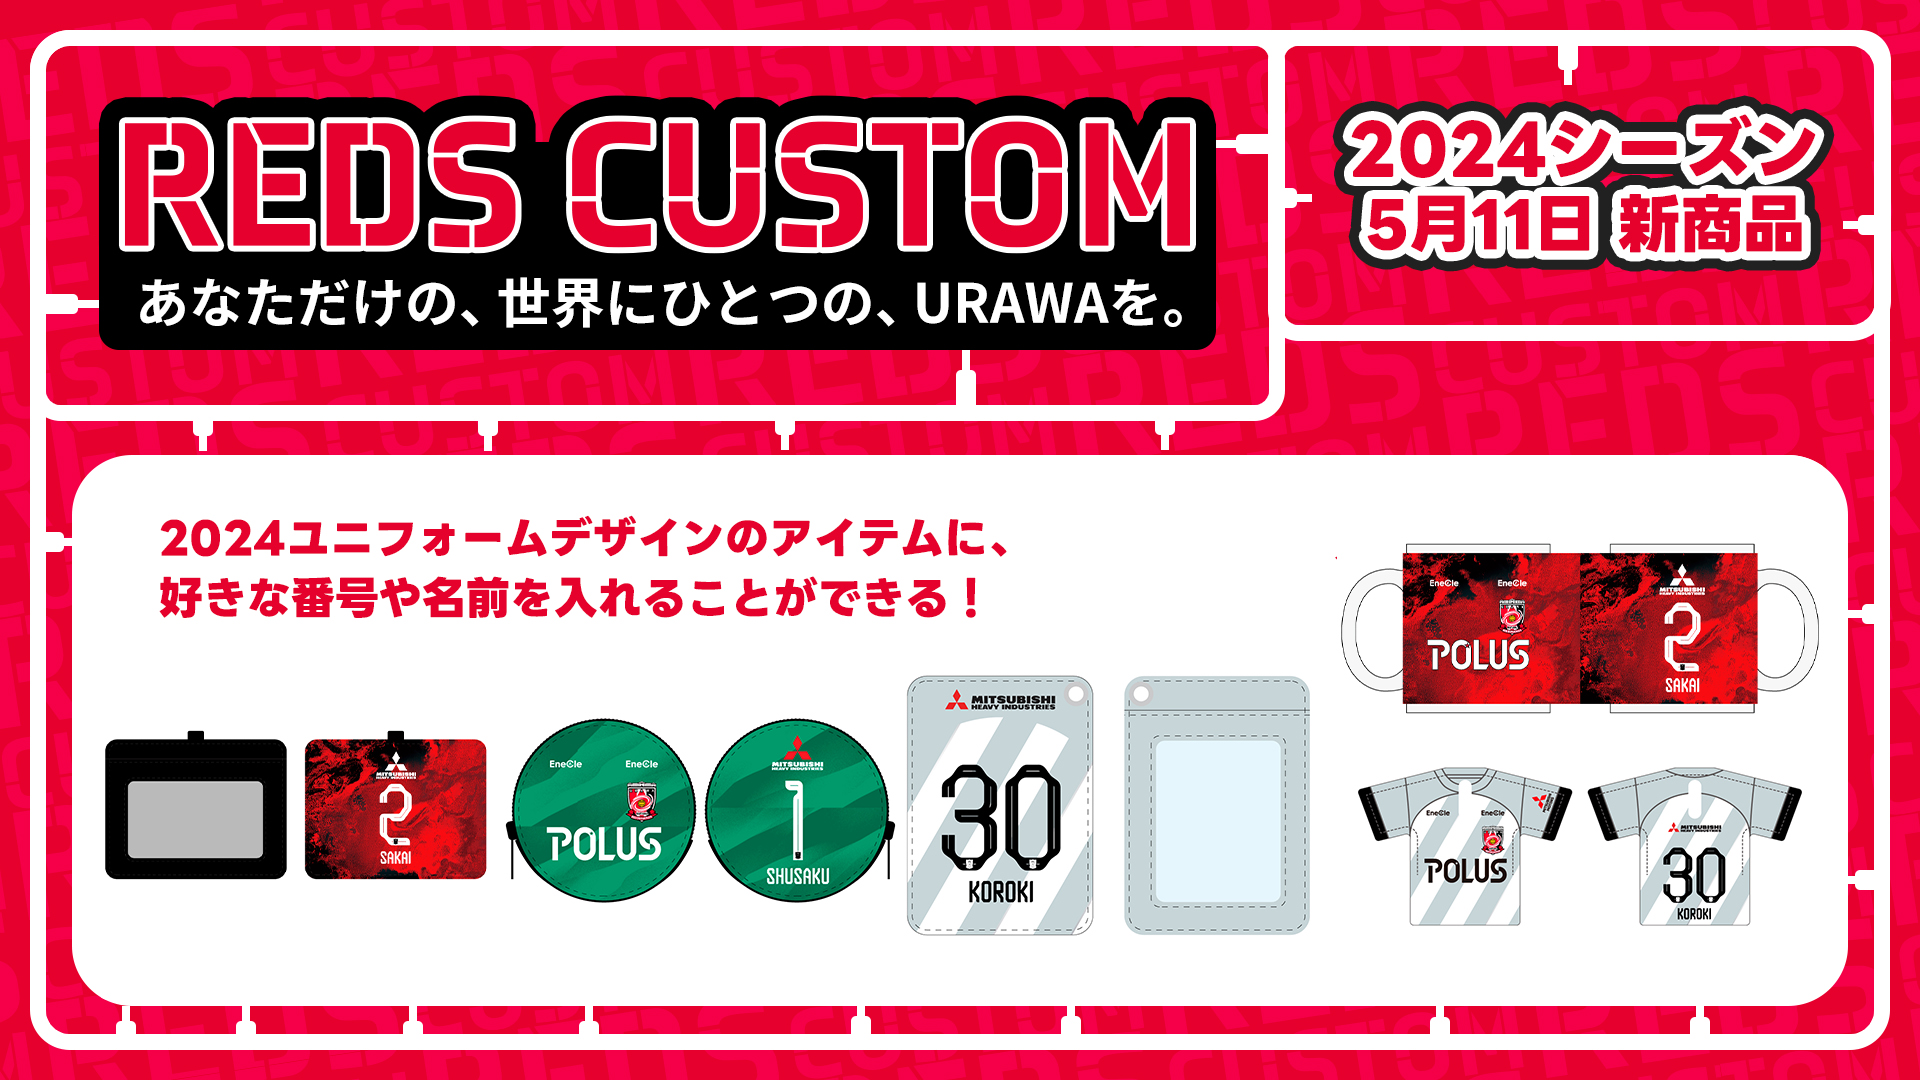 New products will be available at &quot;REDS CUSTOM&quot; from 10:00 on Saturday, May 11th!!